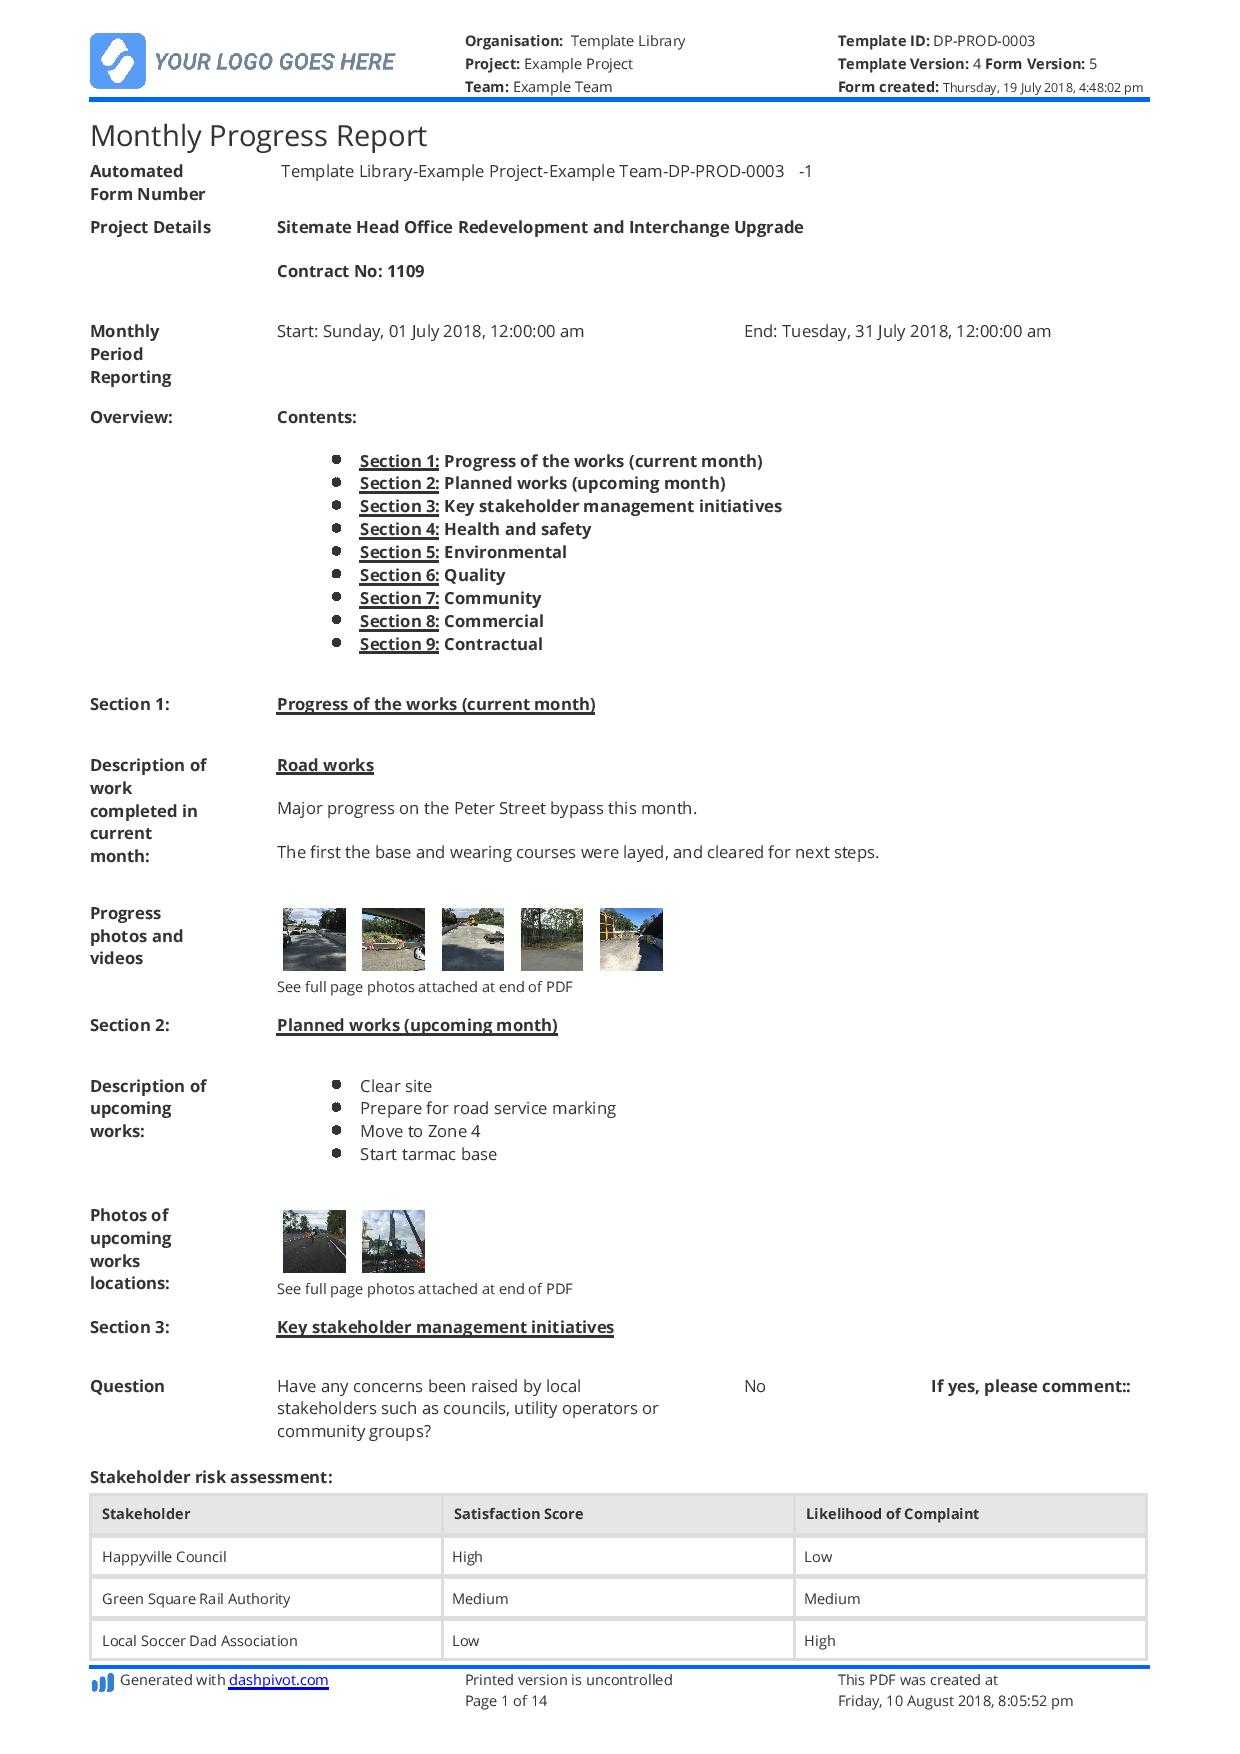 Monthly Construction Progress Report Template: Use This In Site Progress Report Template